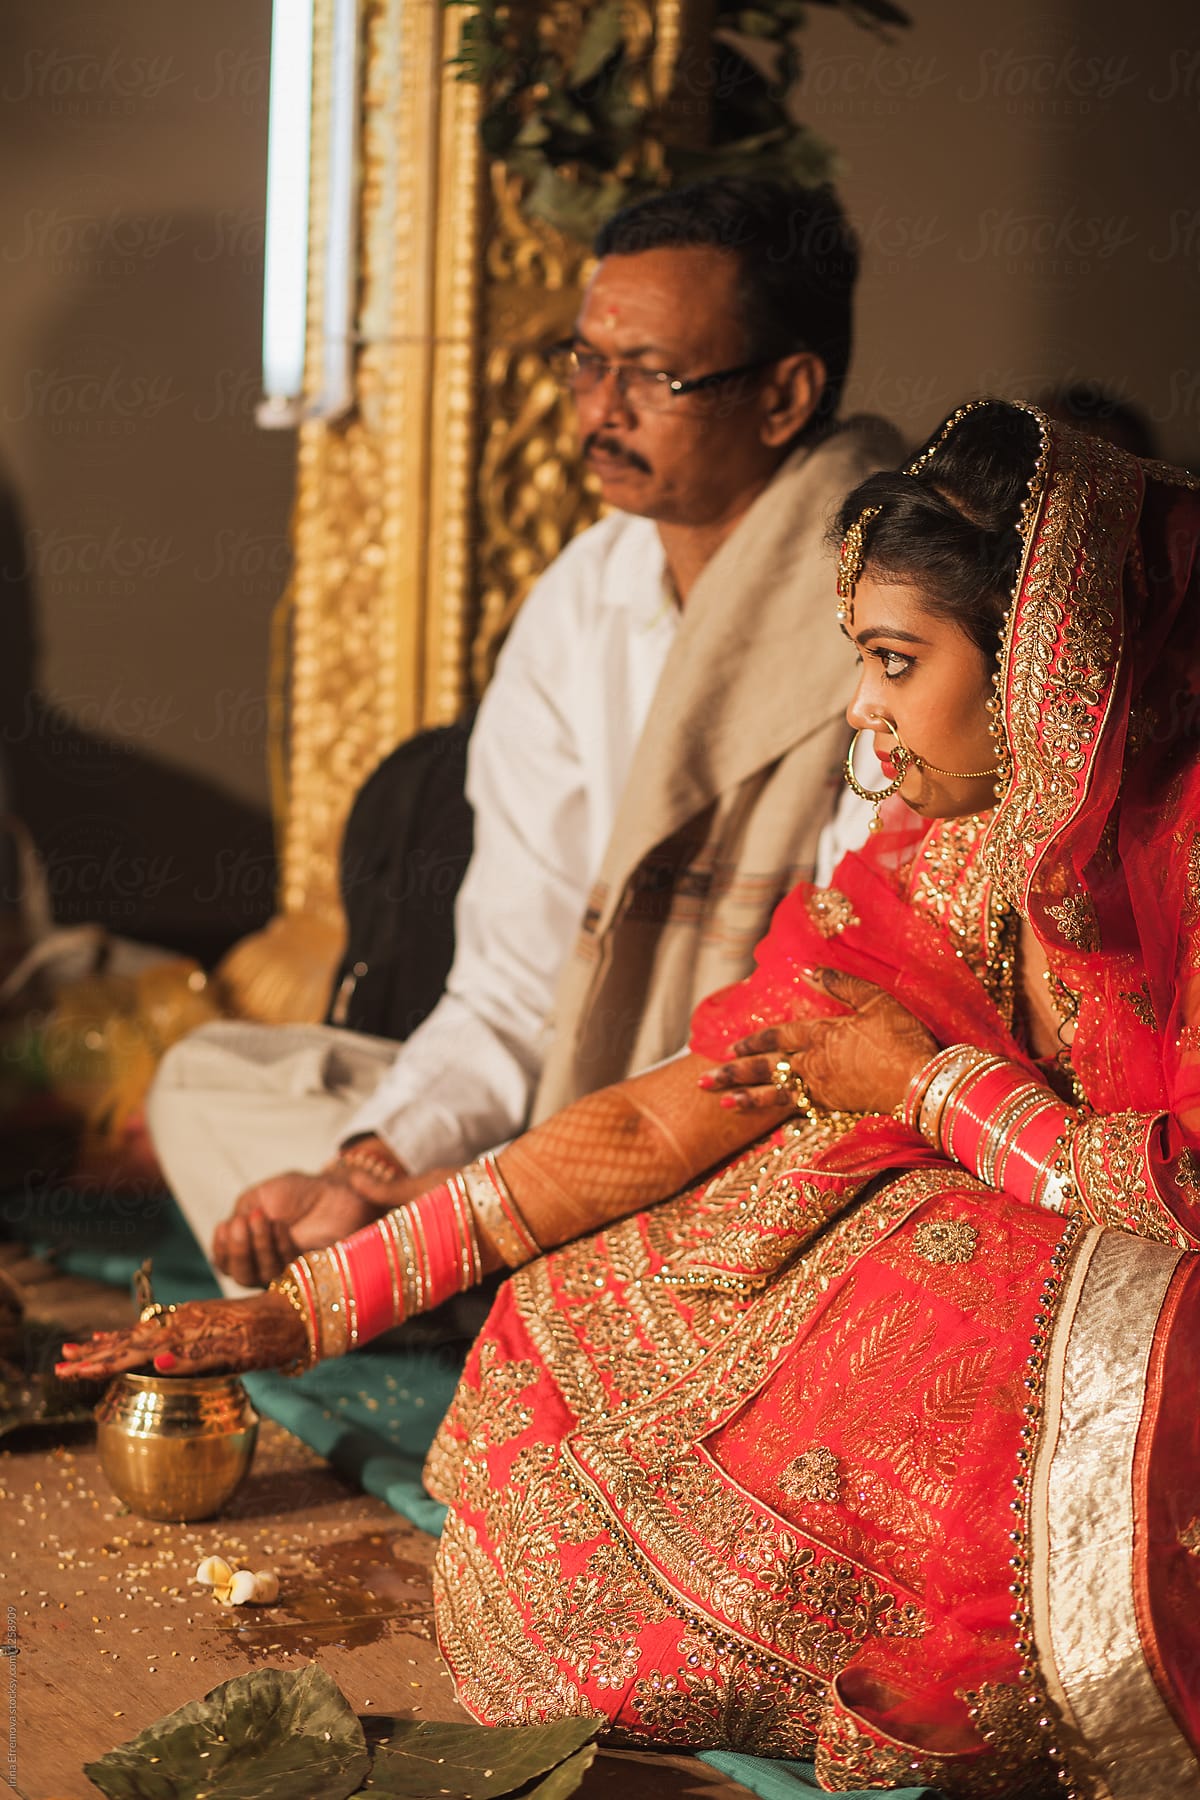 Indian bride and her father during the wedding ceremony